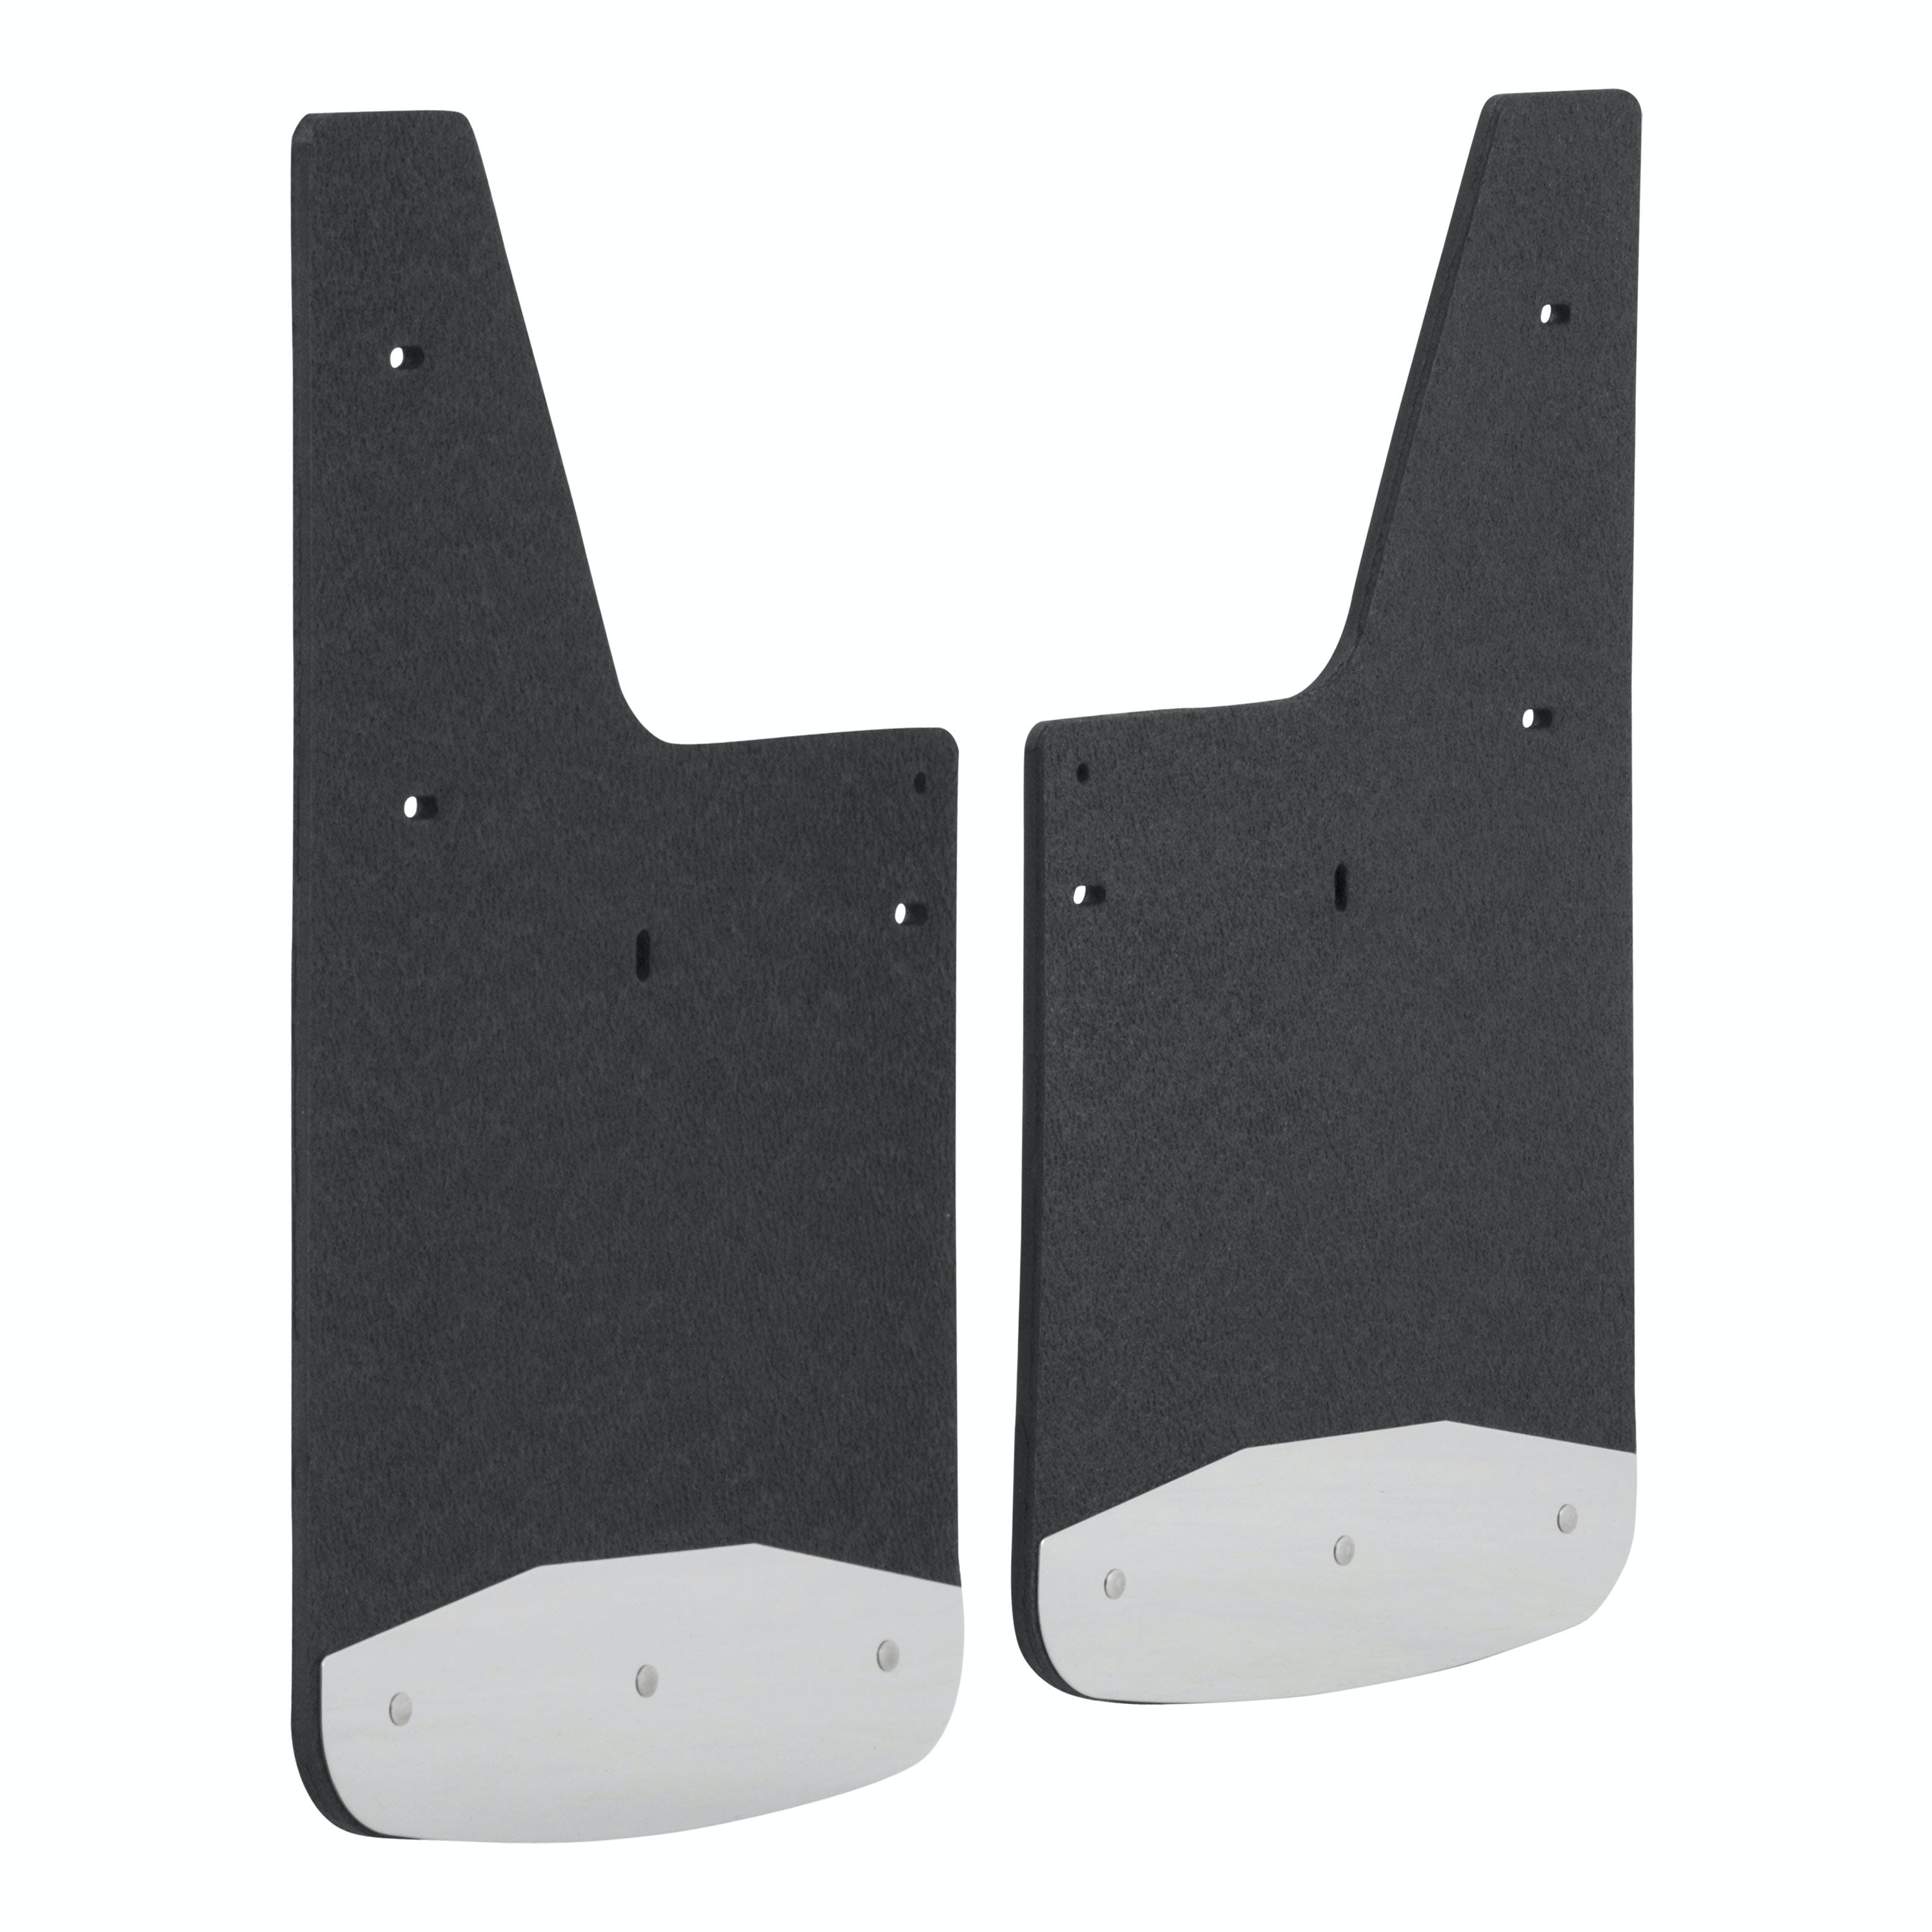 LUVERNE 251510 Textured Rubber Mud Guards